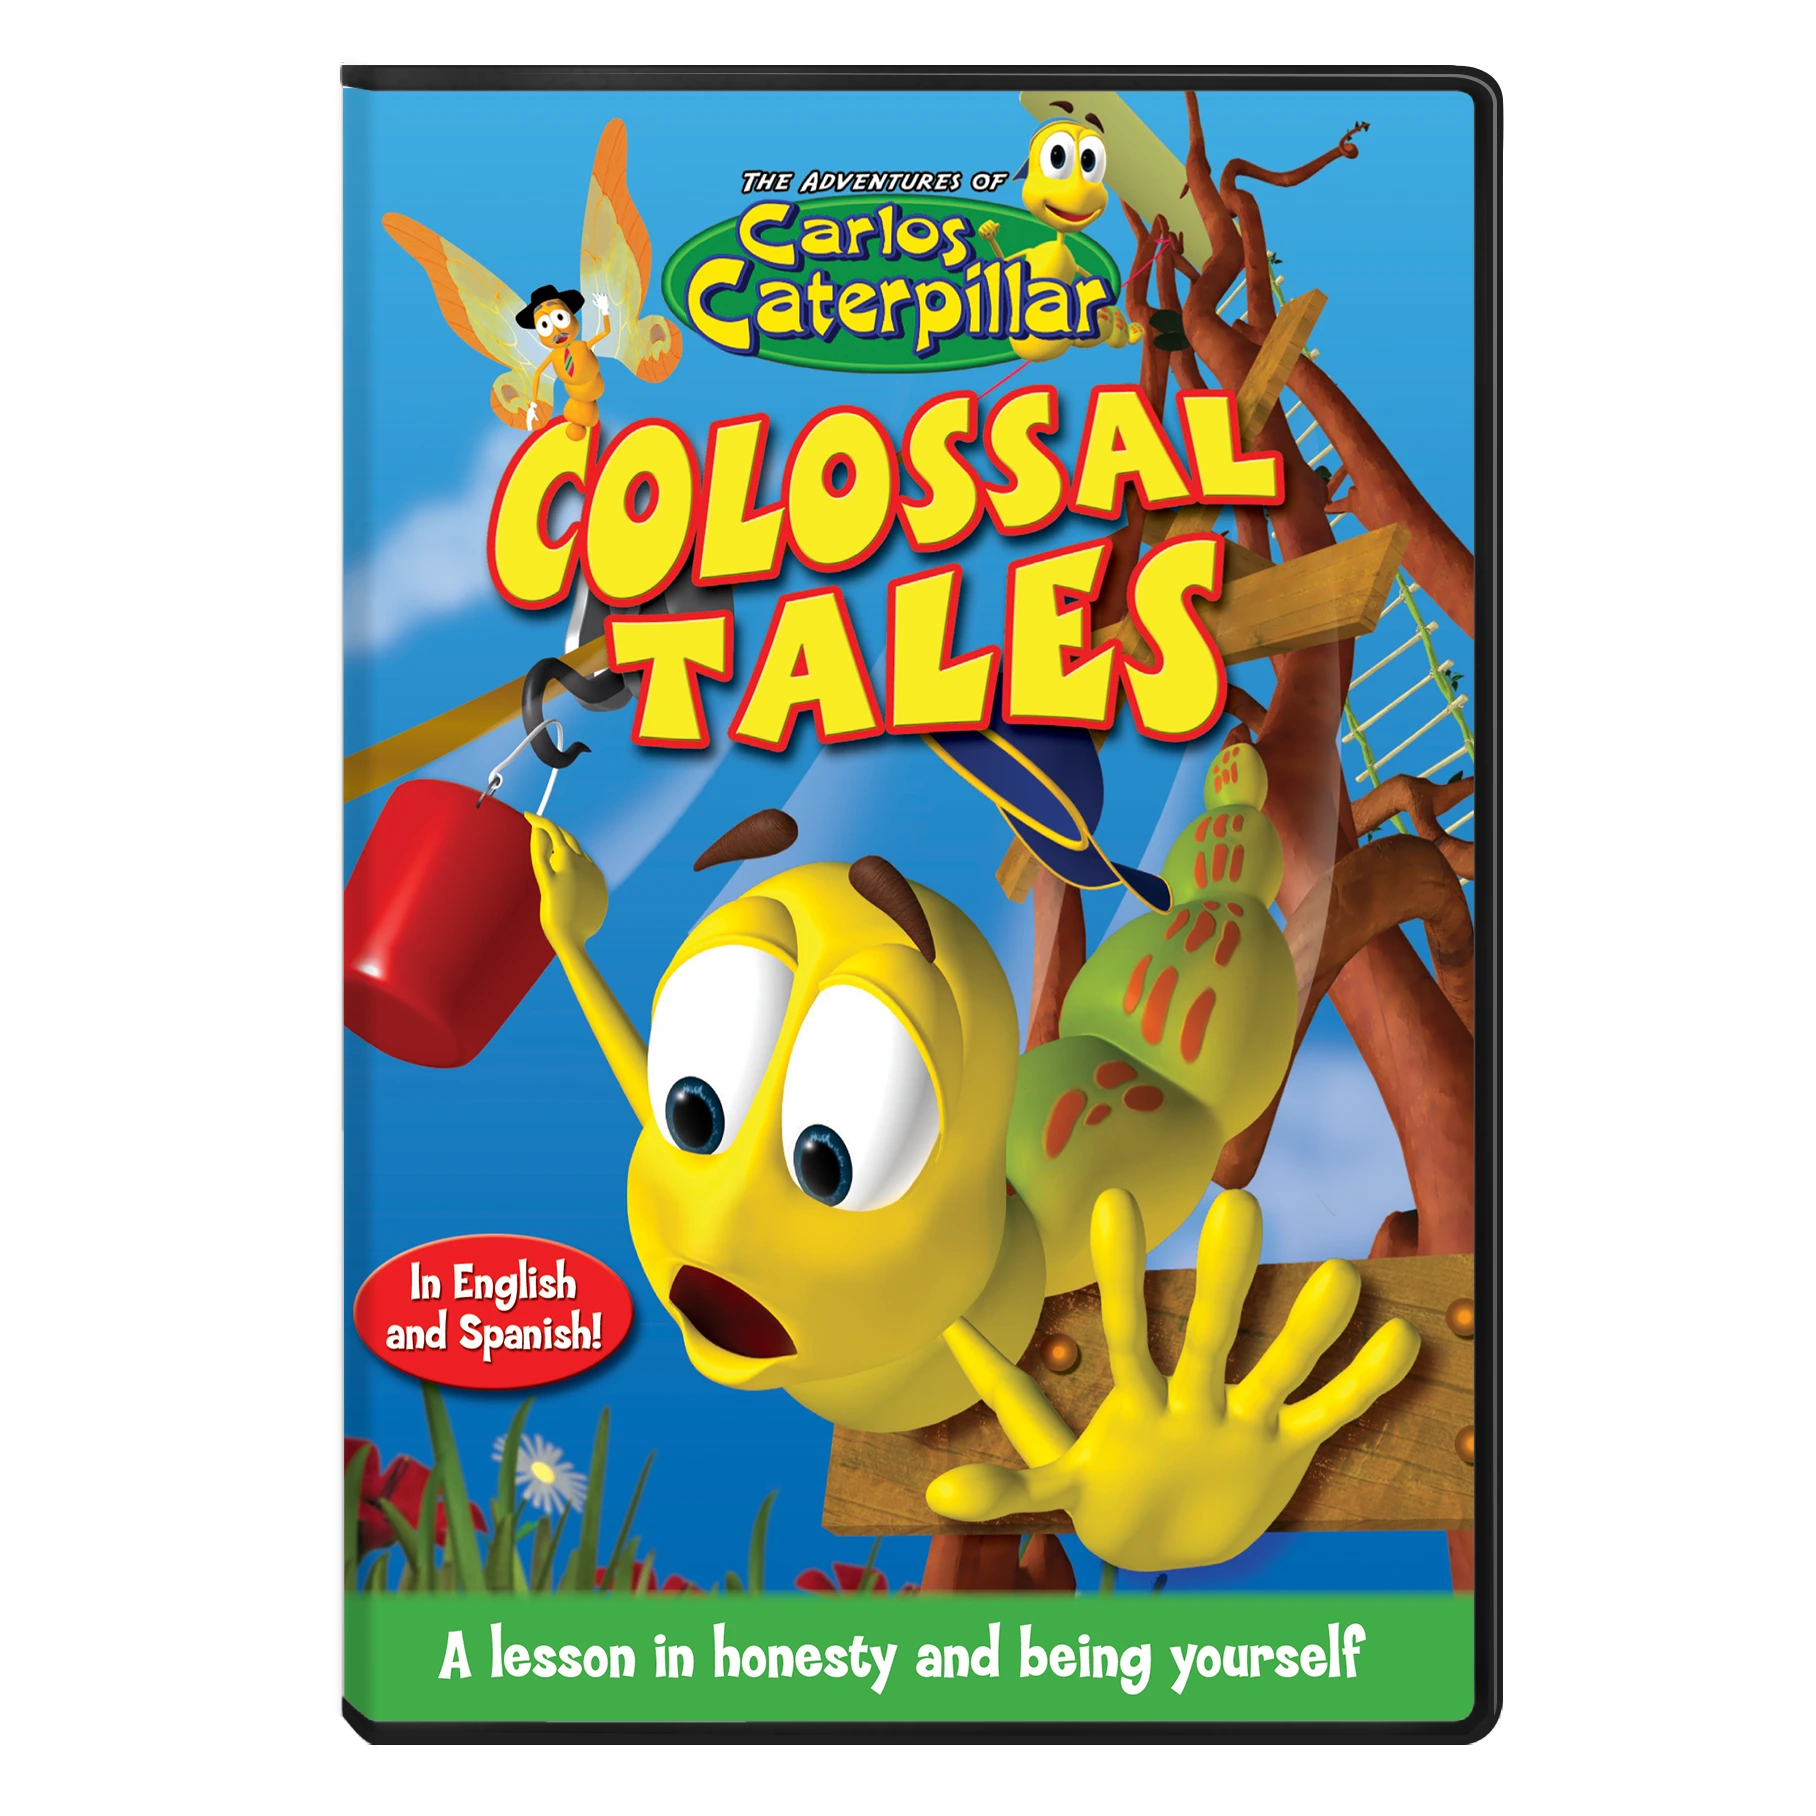 Carlos Caterpillar Episode 1 - Colossal Tales